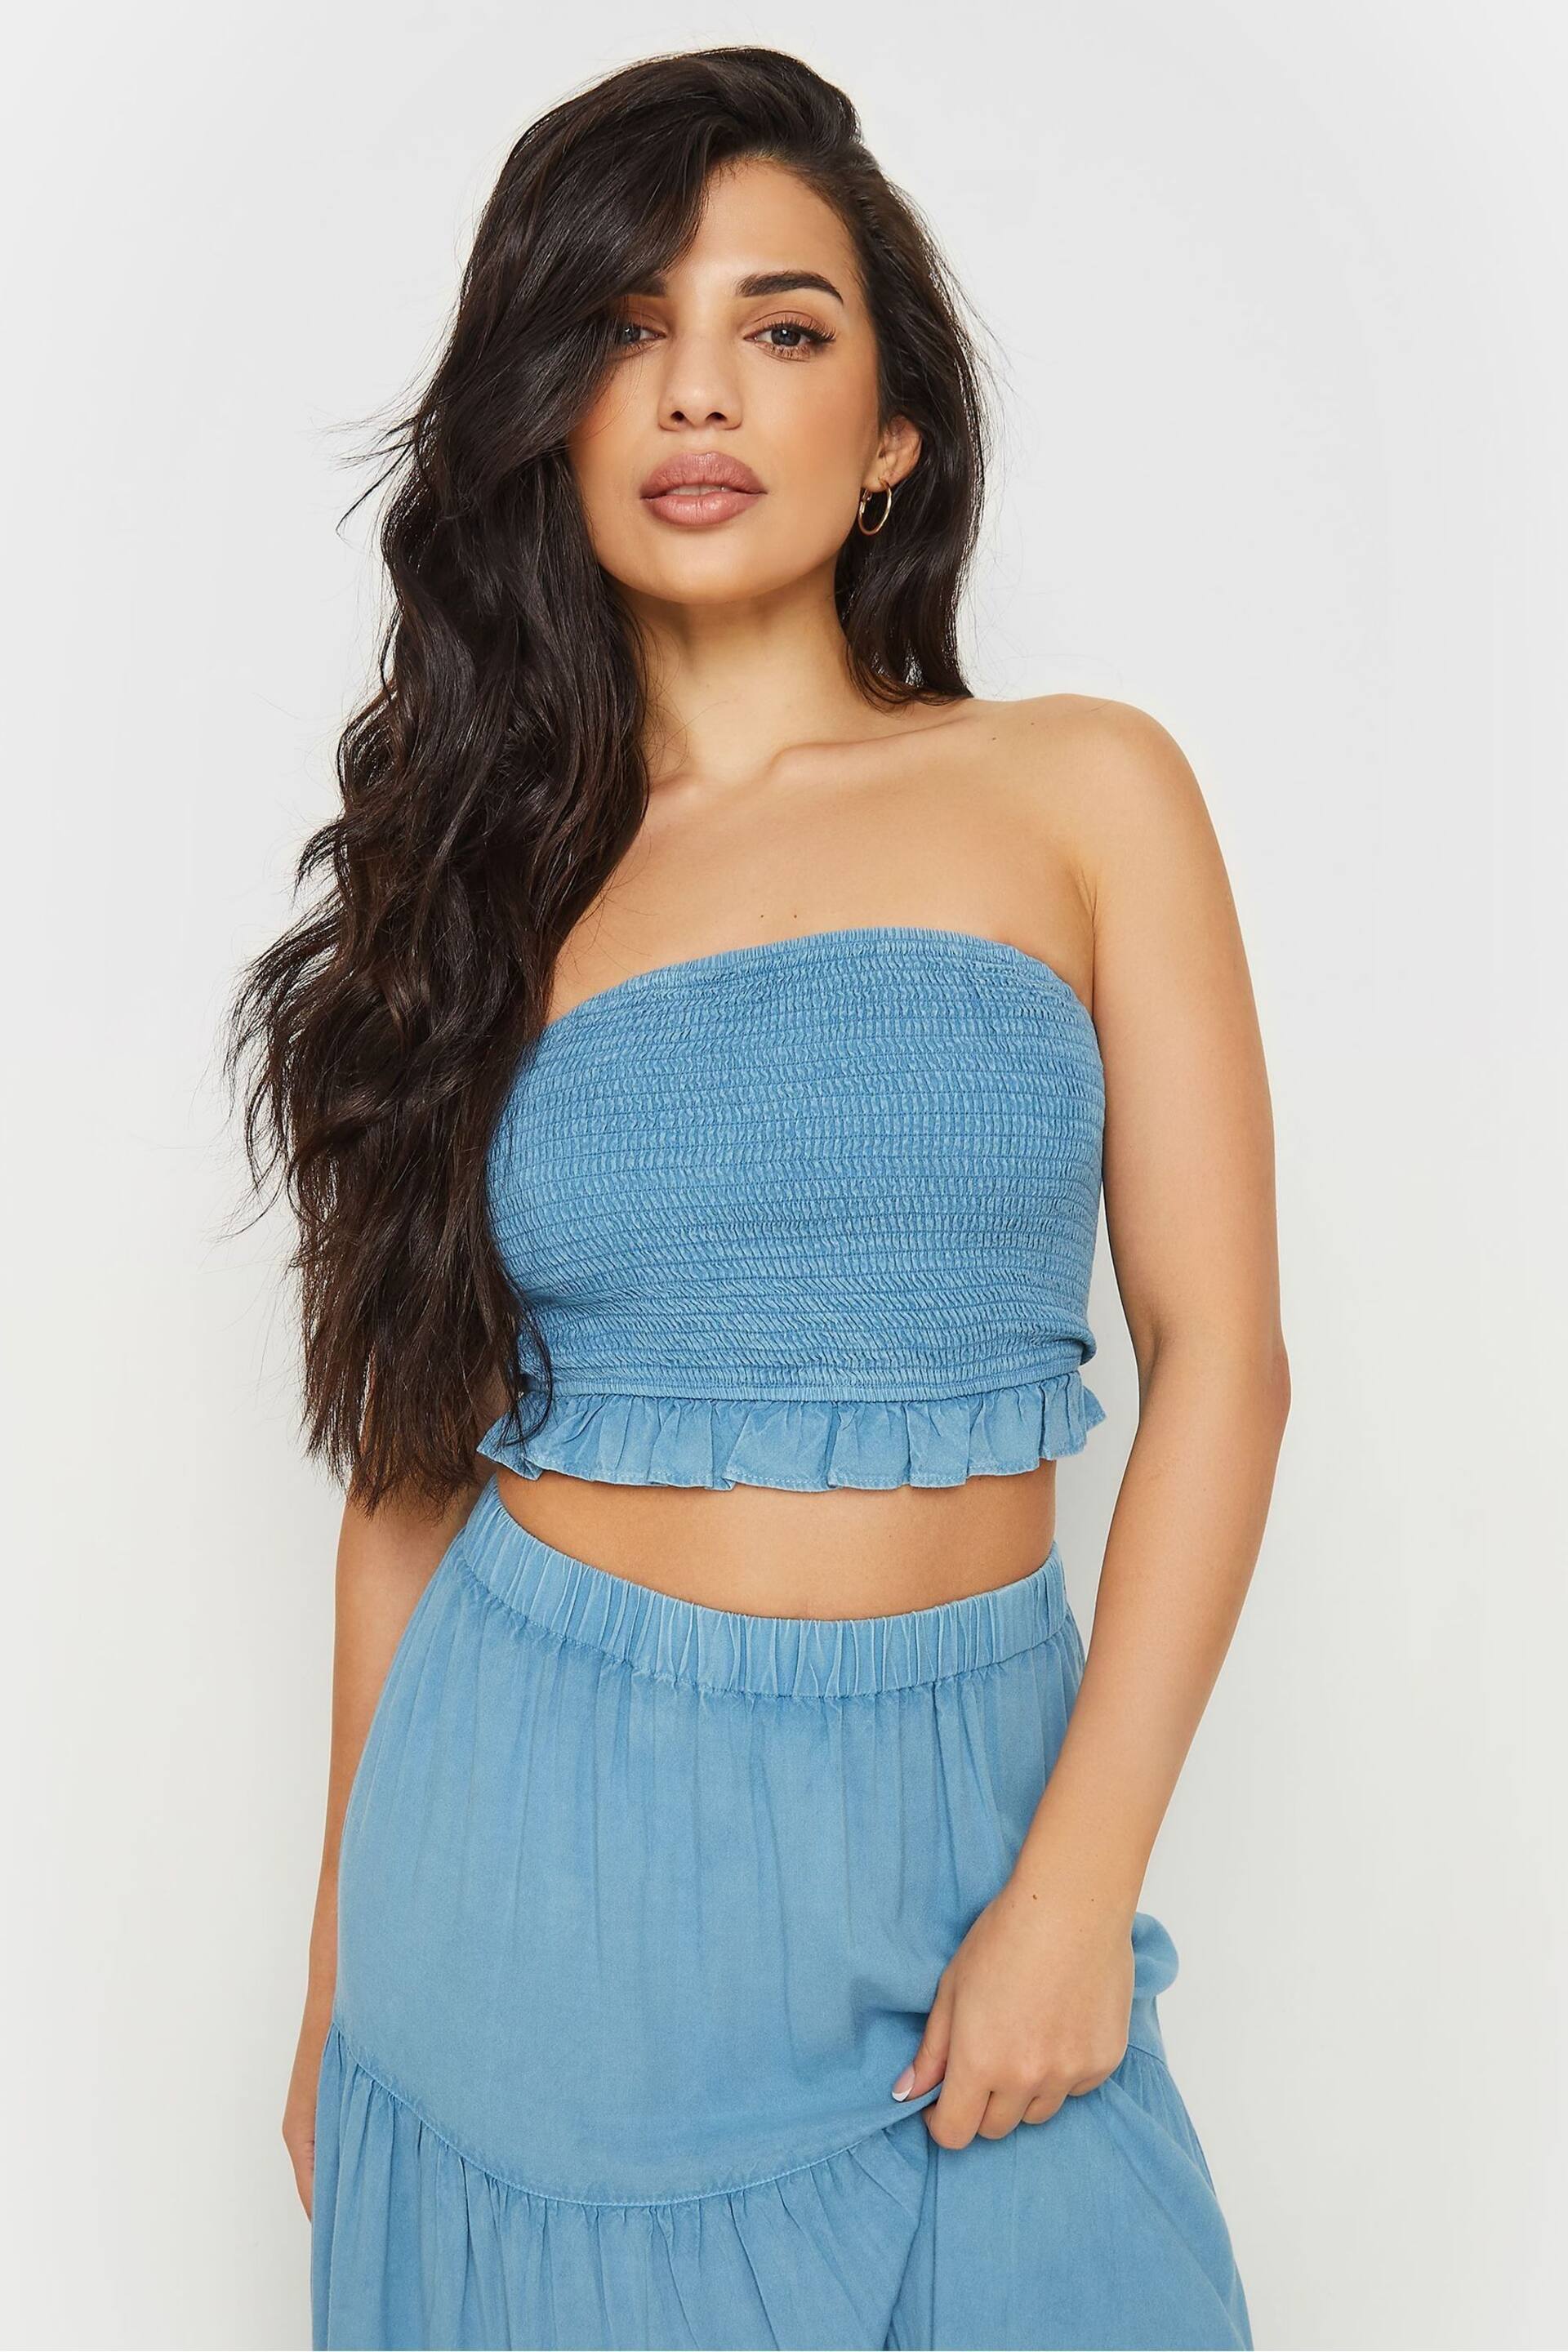 PixieGirl Petite Blue Chambray Shirred Bandeau Top - Image 4 of 5